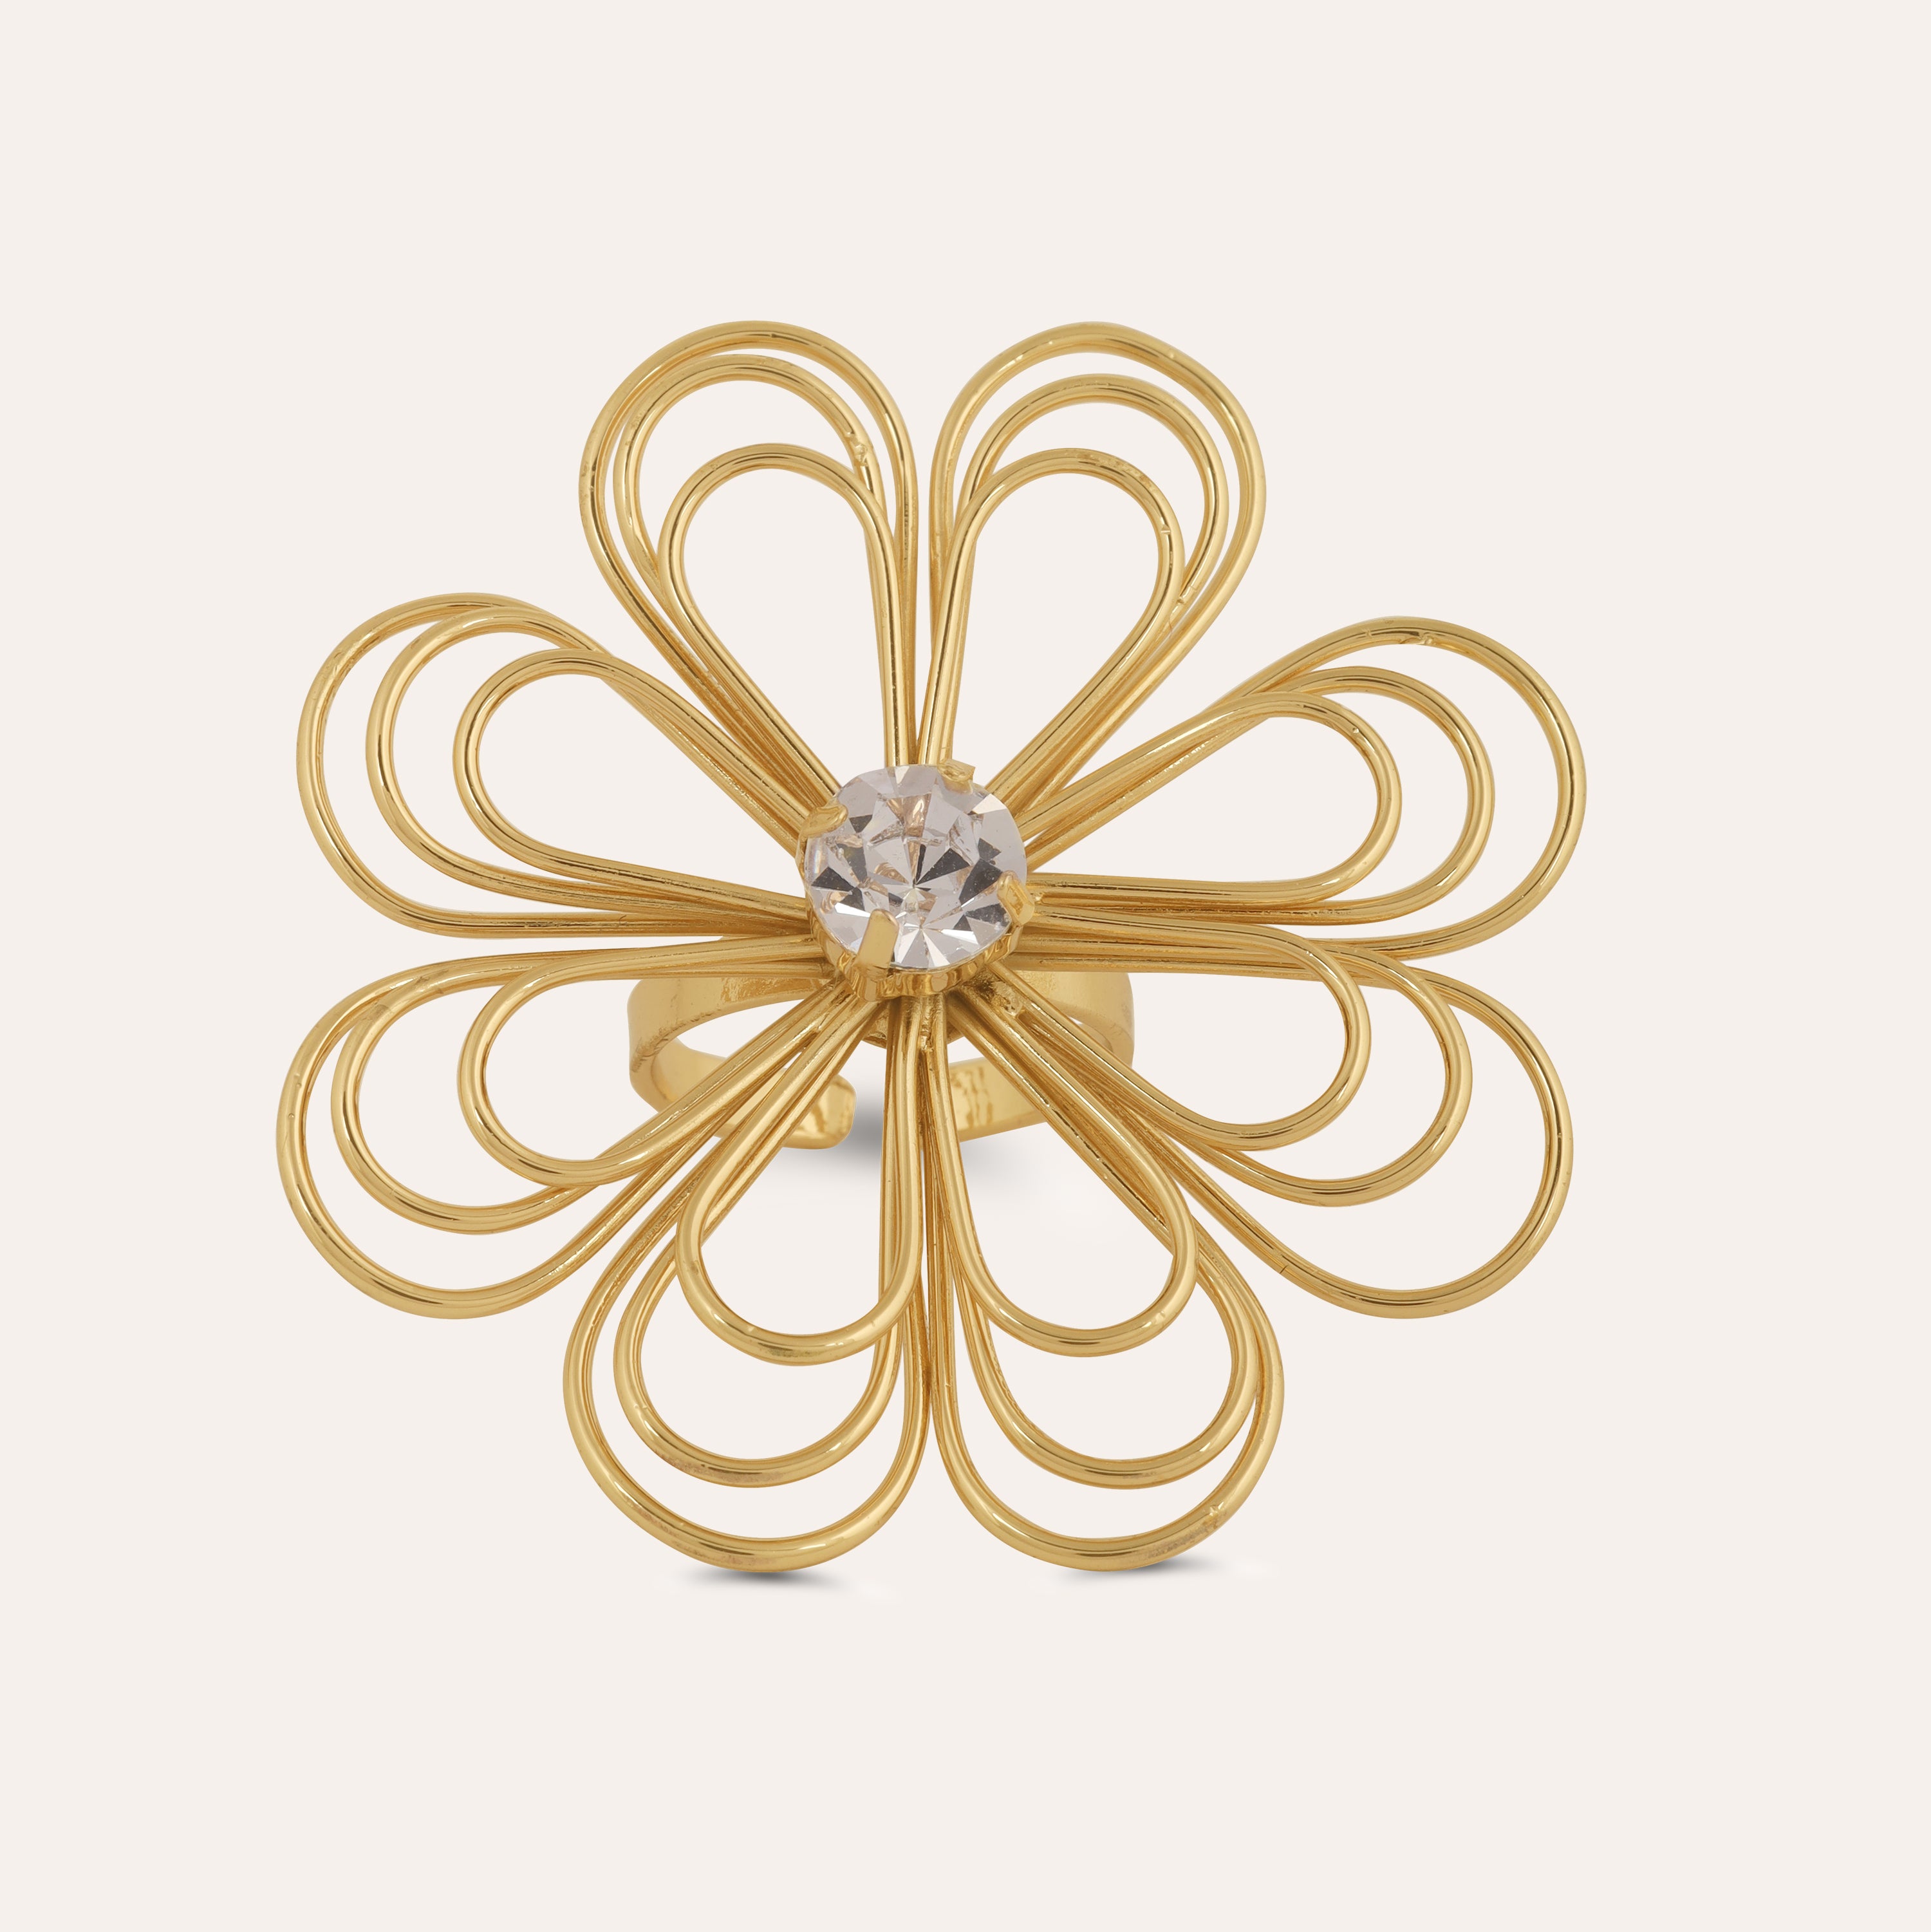 TFC Floral Statement Gold Plated Adjustable Ring-Elevate your style with our exquisite collection of gold-plated adjustable rings for women, including timeless signet rings. Explore cheapest fashion jewellery designs with anti-tarnish properties, all at The Fun Company with a touch of elegance